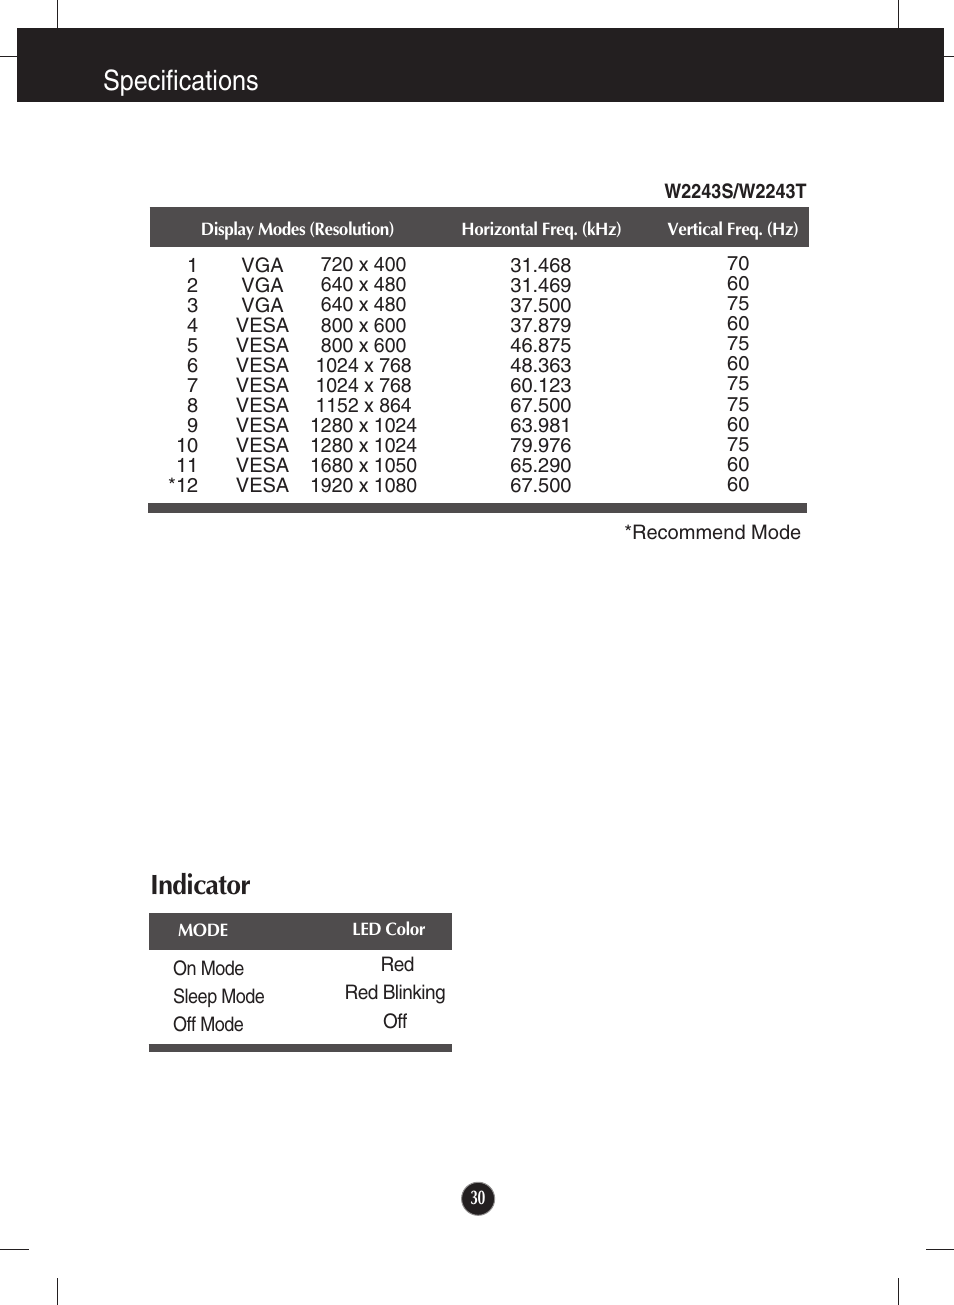 W2243s/w2243t, Indicator, Specifications | LG W1943TB-PF User Manual | Page 31 / 34